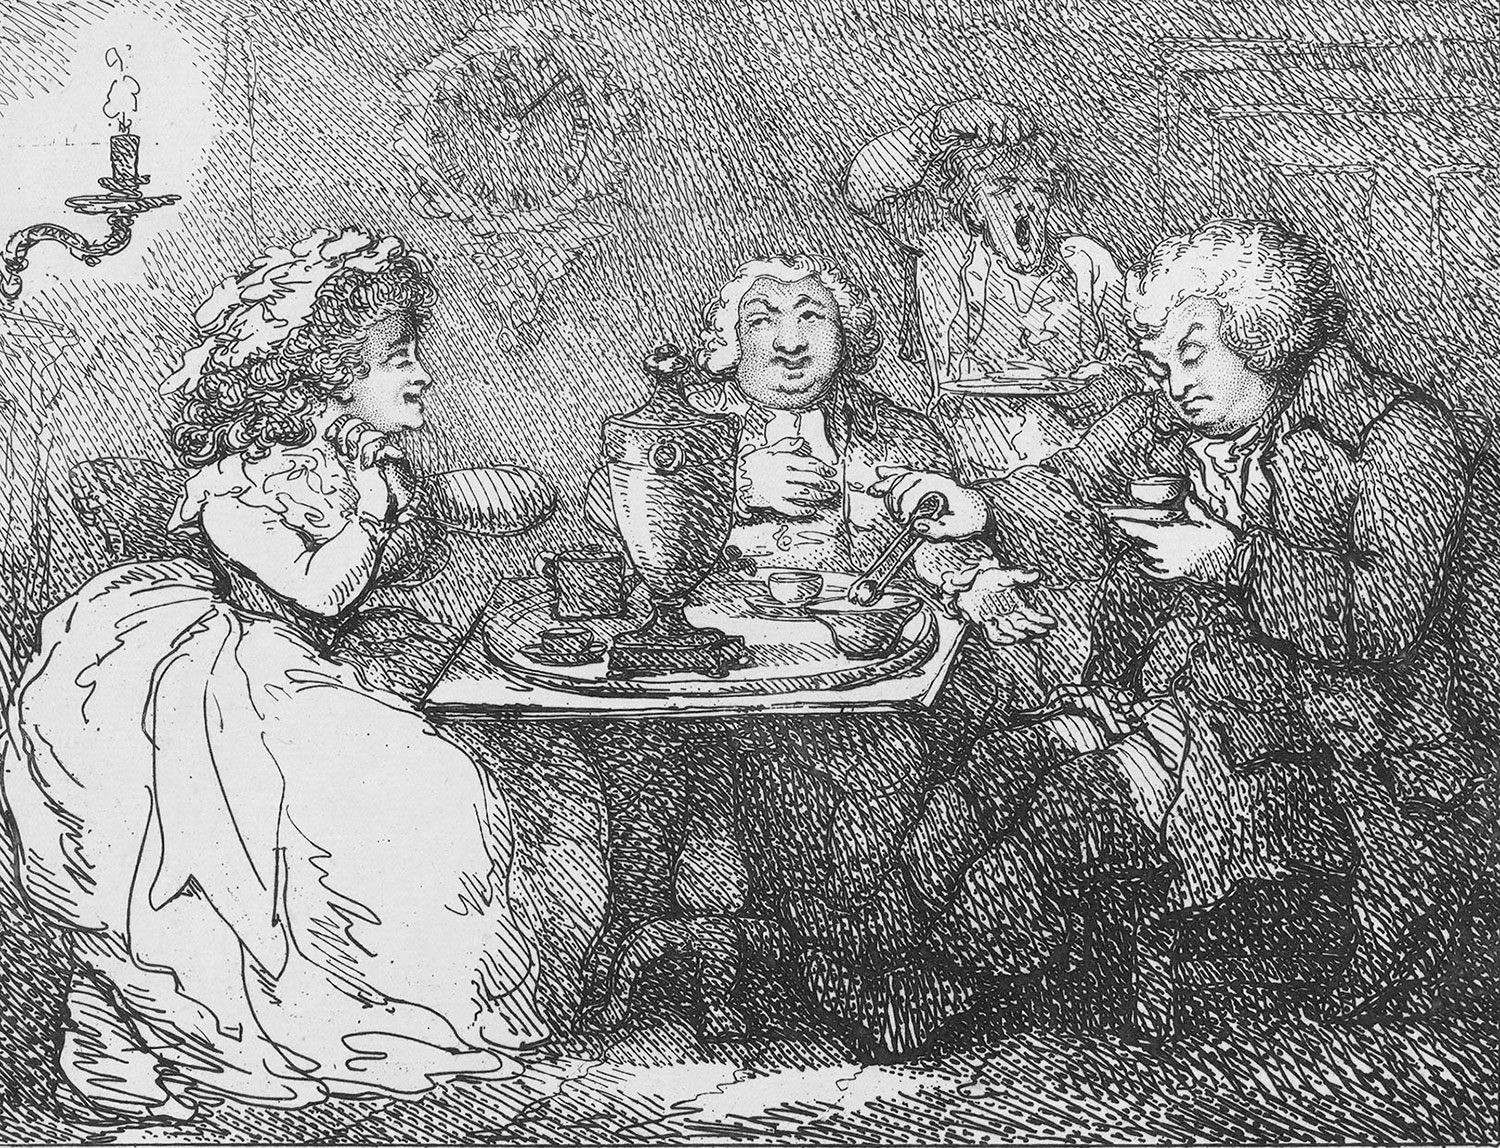 Johnson, Boswell, and the Mrs. sit down to tea